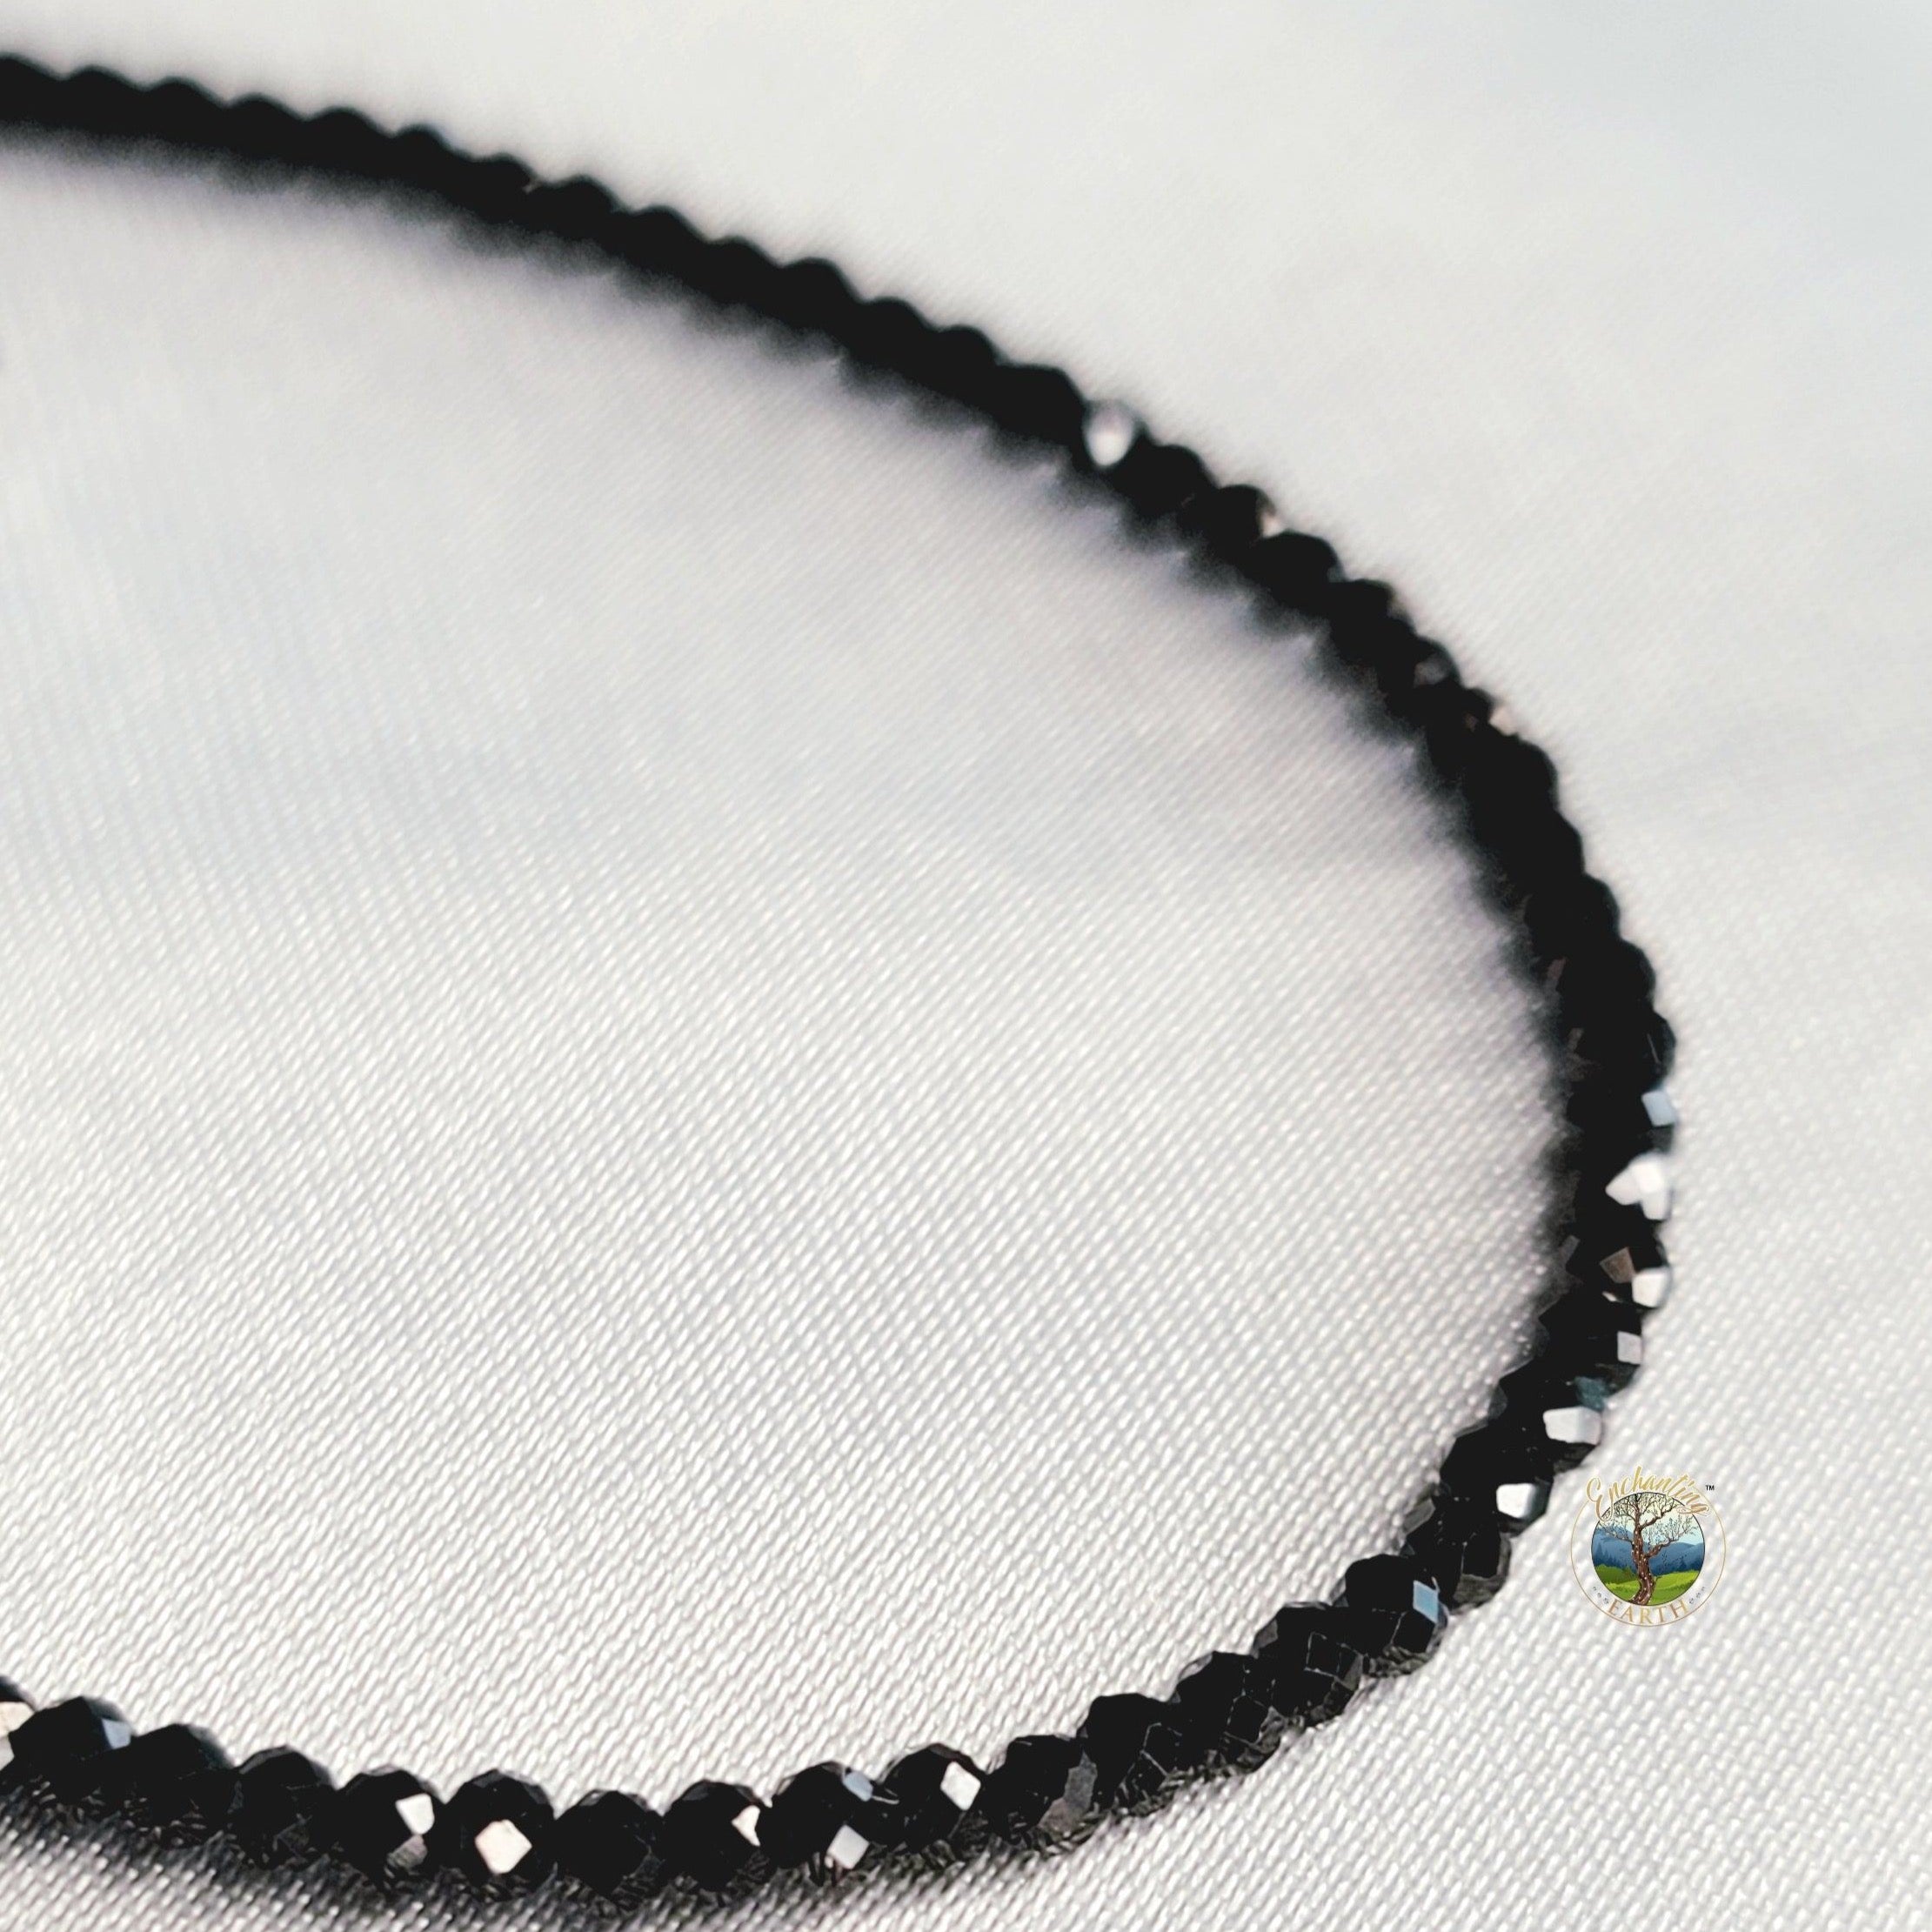 Black Tourmaline Micro Faceted Bracelet for Protection & Purification